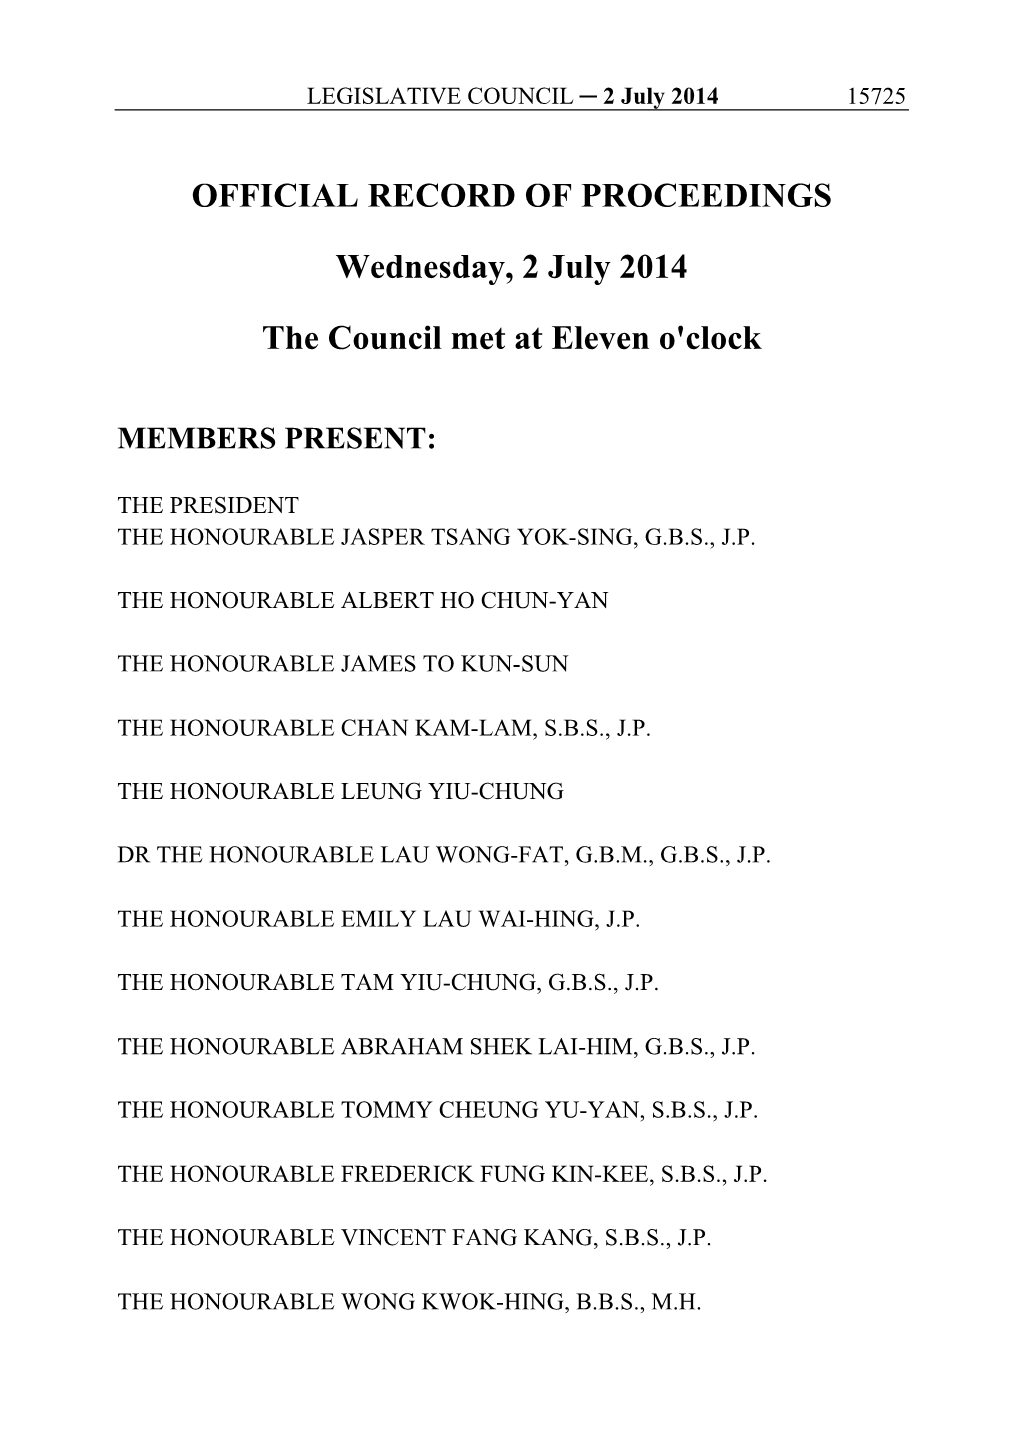 OFFICIAL RECORD of PROCEEDINGS Wednesday, 2 July